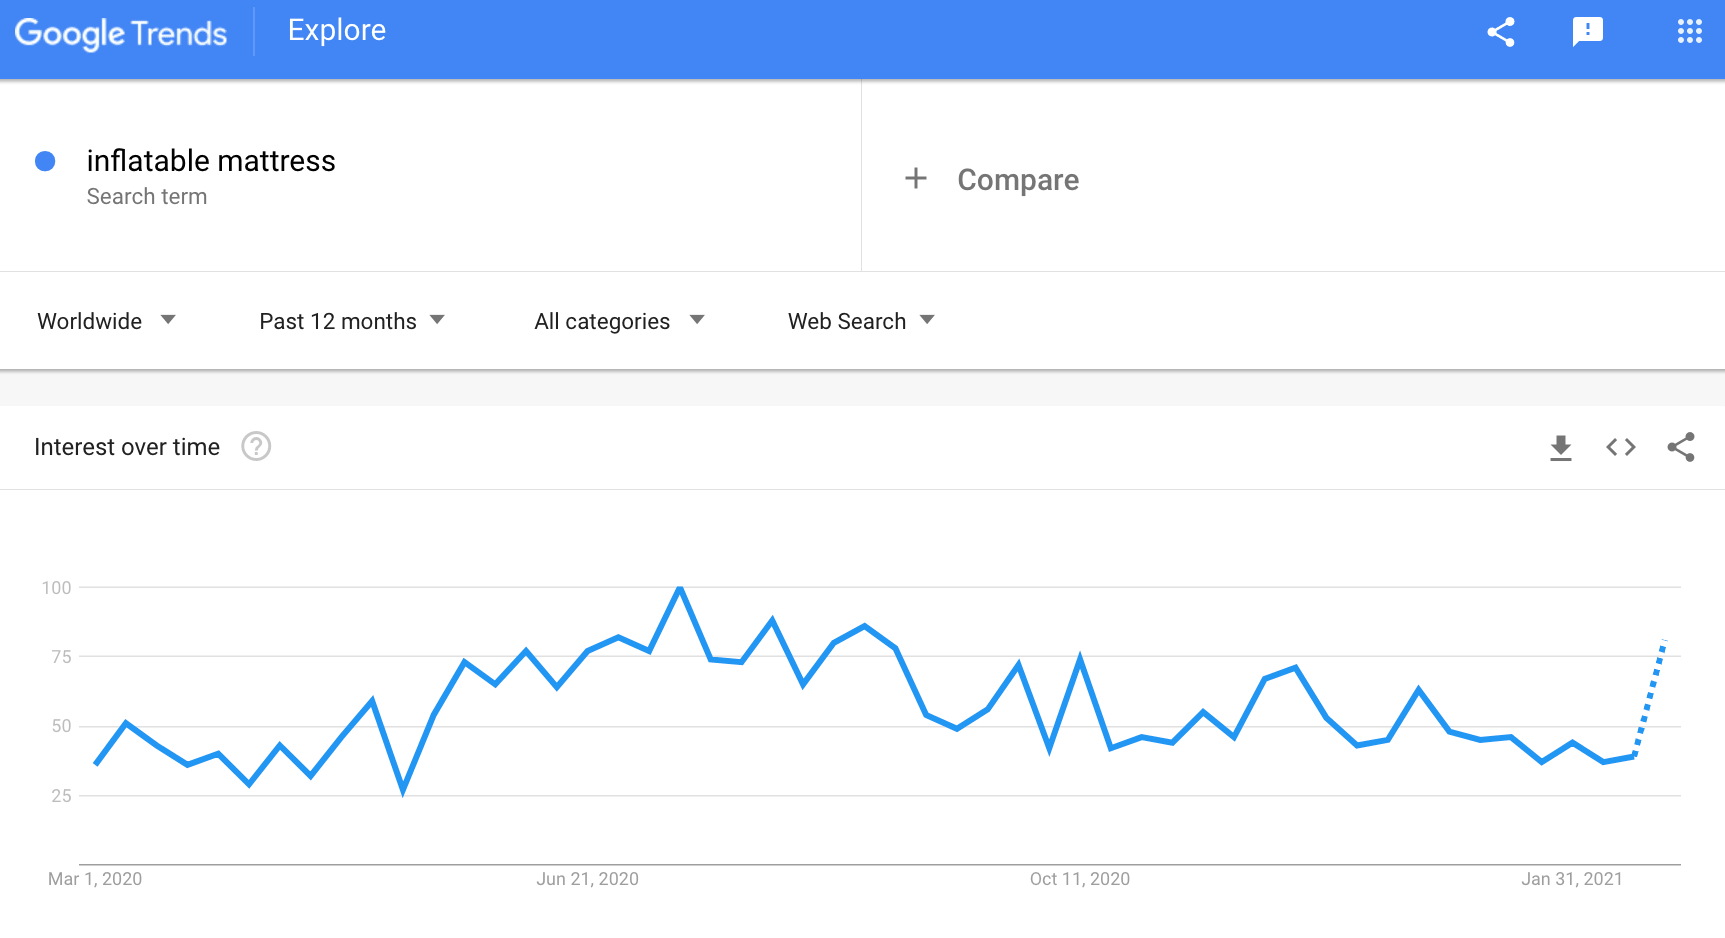 a picture showing the rise of interest in inflatable mattresses in summer